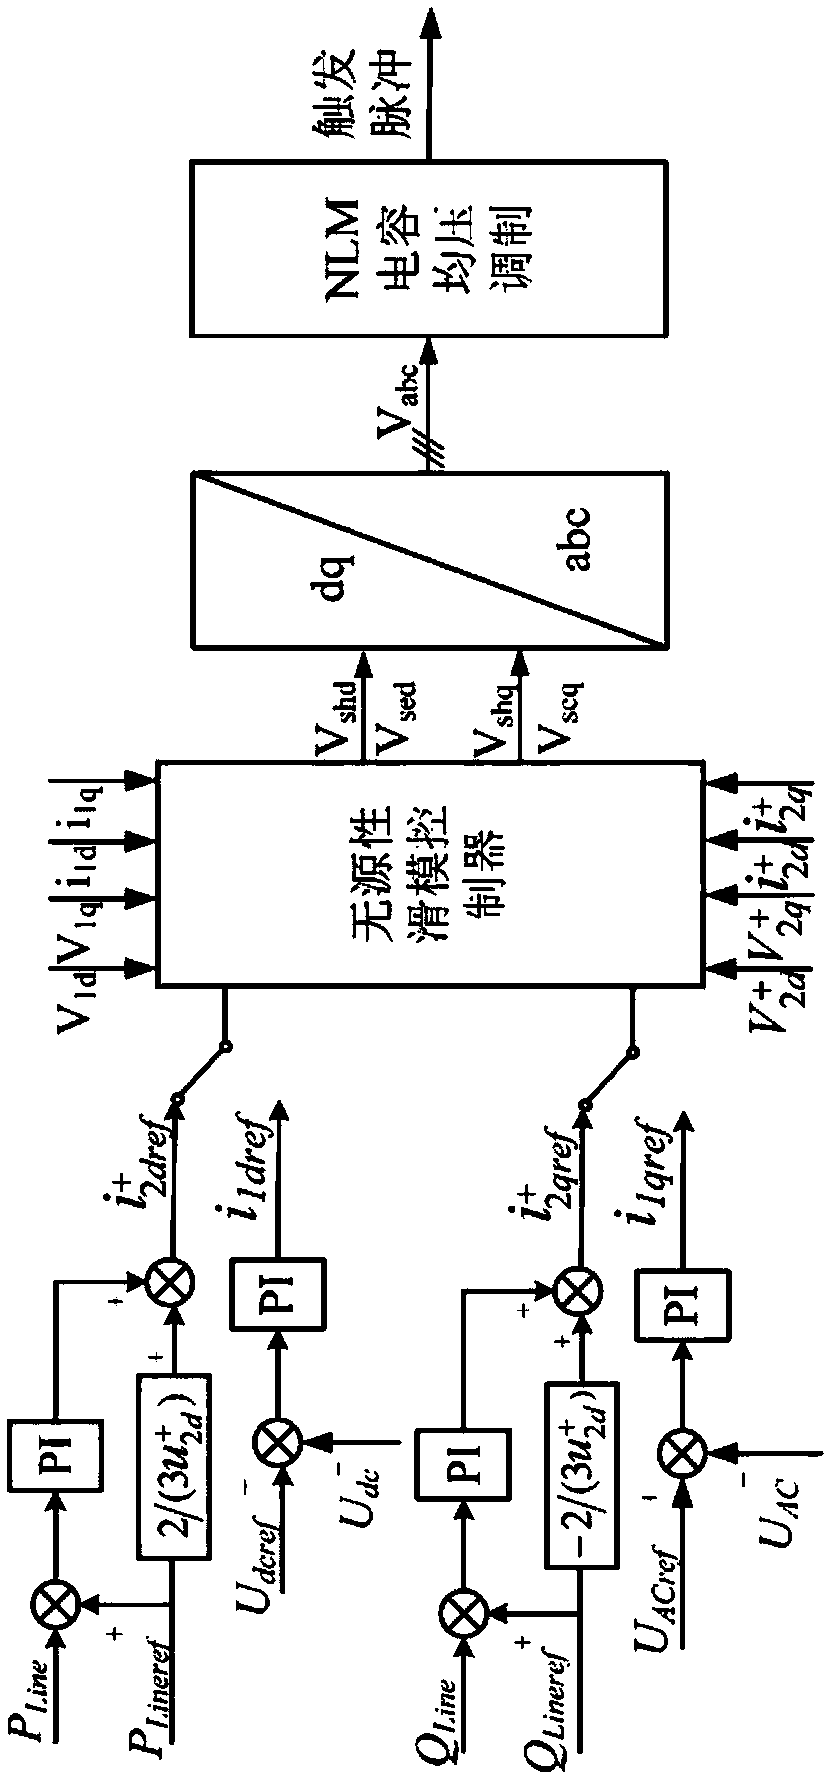 UPFC (unified power flow controller) three-phase imbalance optimization method based on nonlinear control